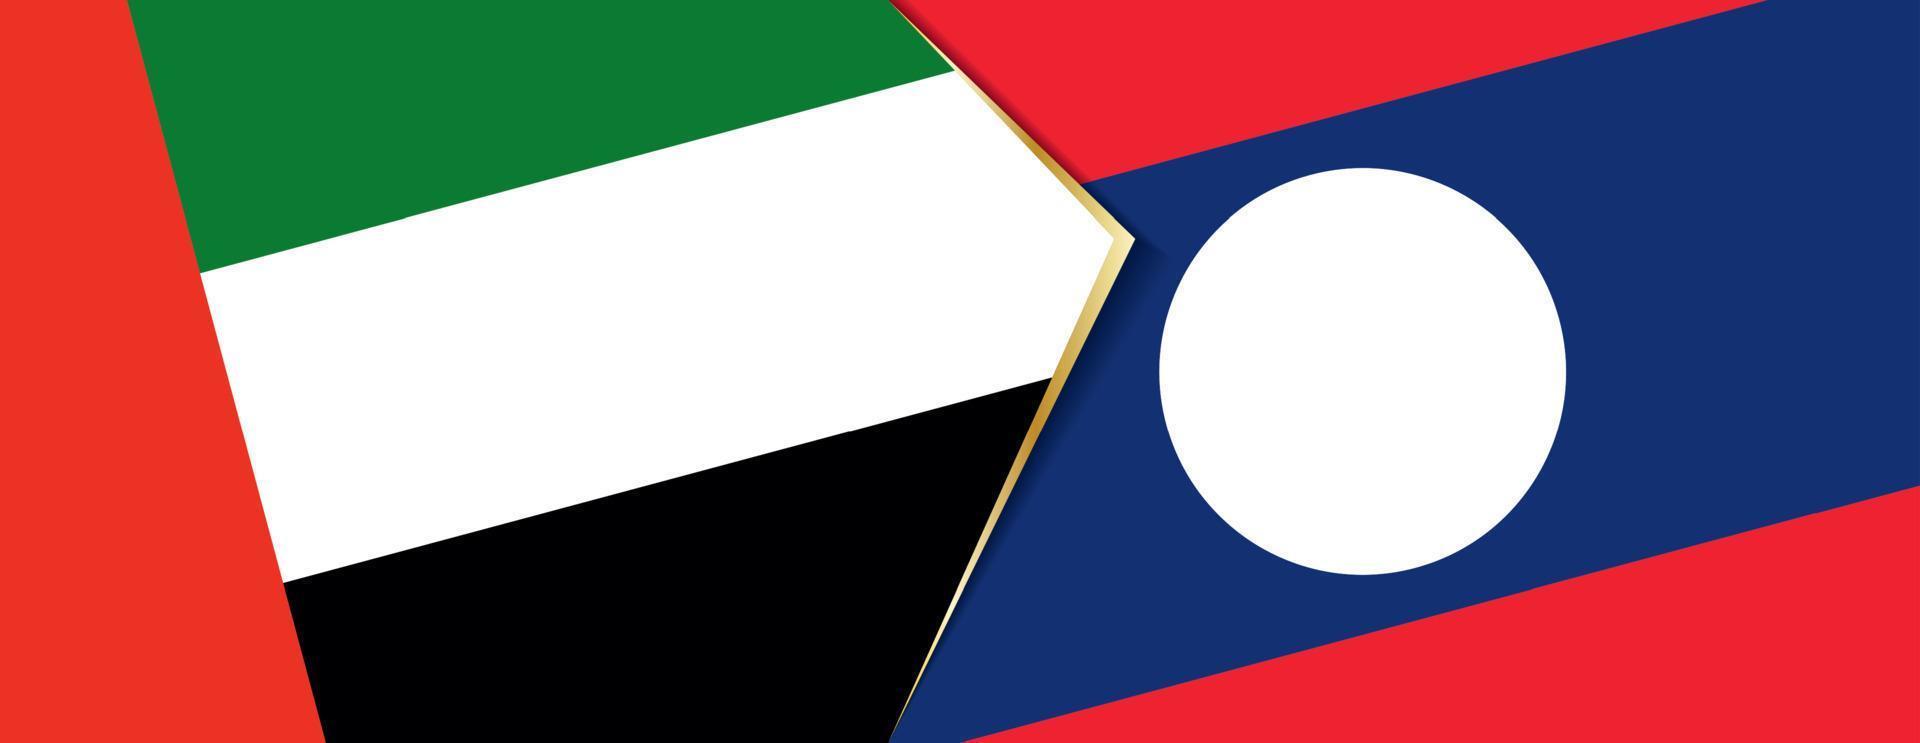 United Arab Emirates and Laos flags, two vector flags.